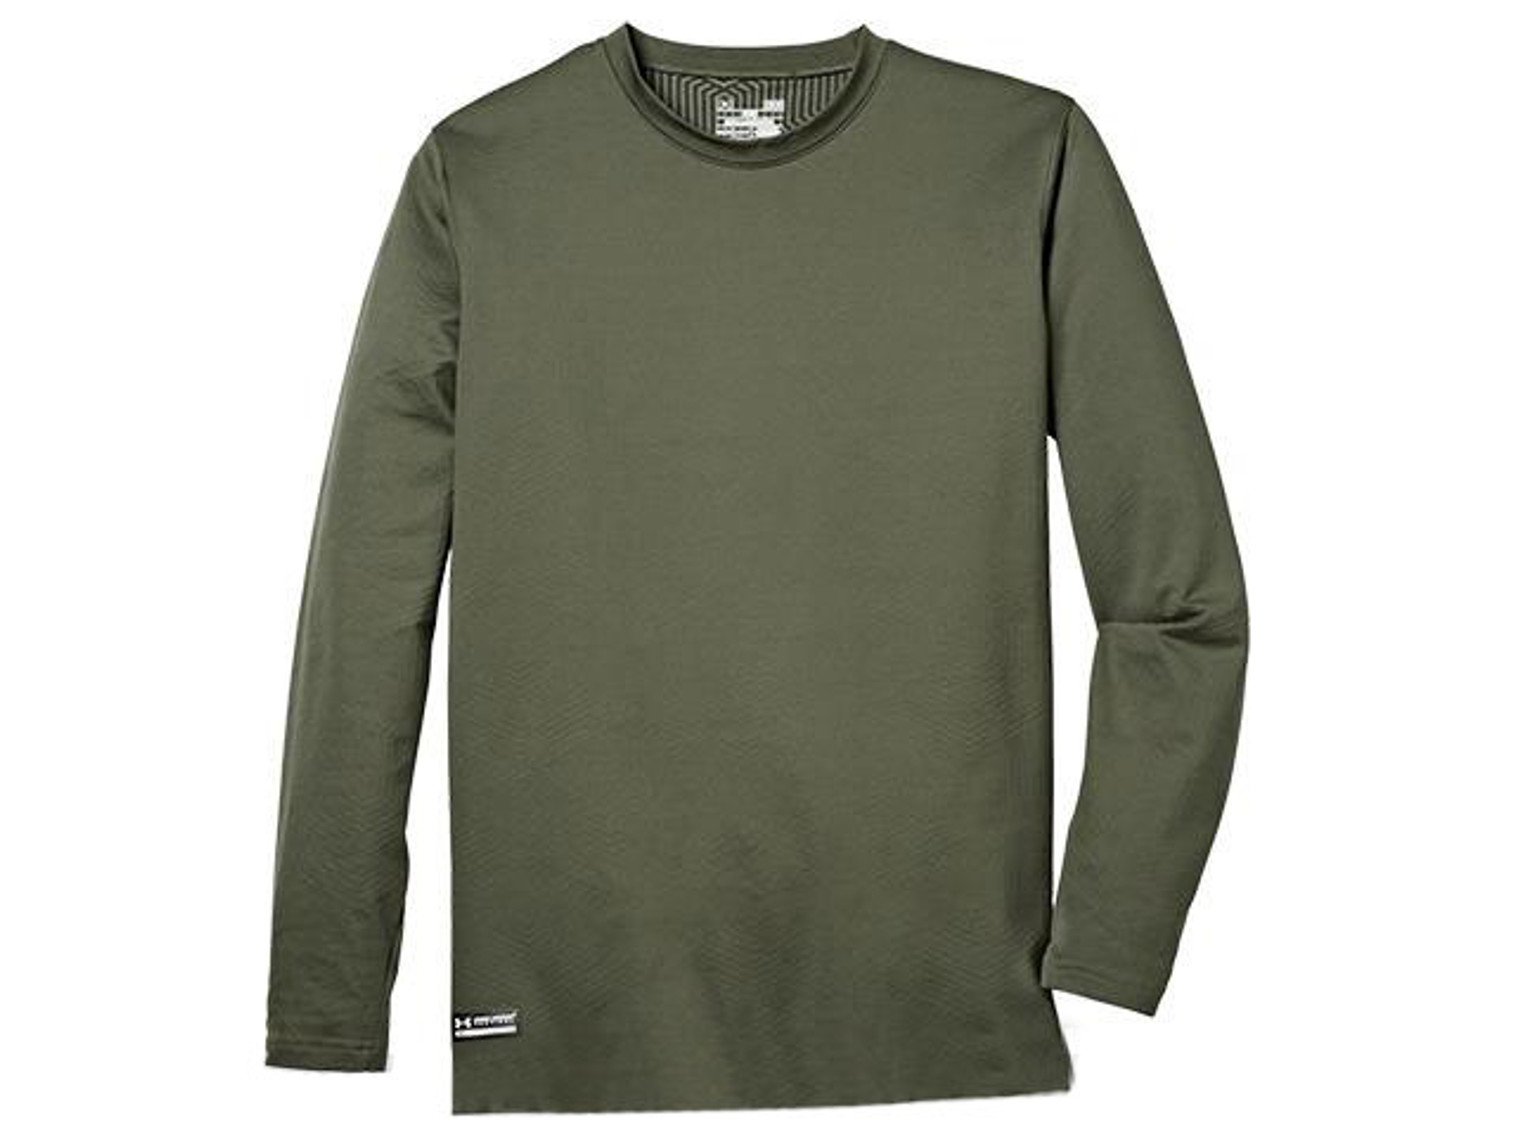 Under Armour Men's ColdGear Infrared Tactical Fitted Crew - OD Green (Medium)